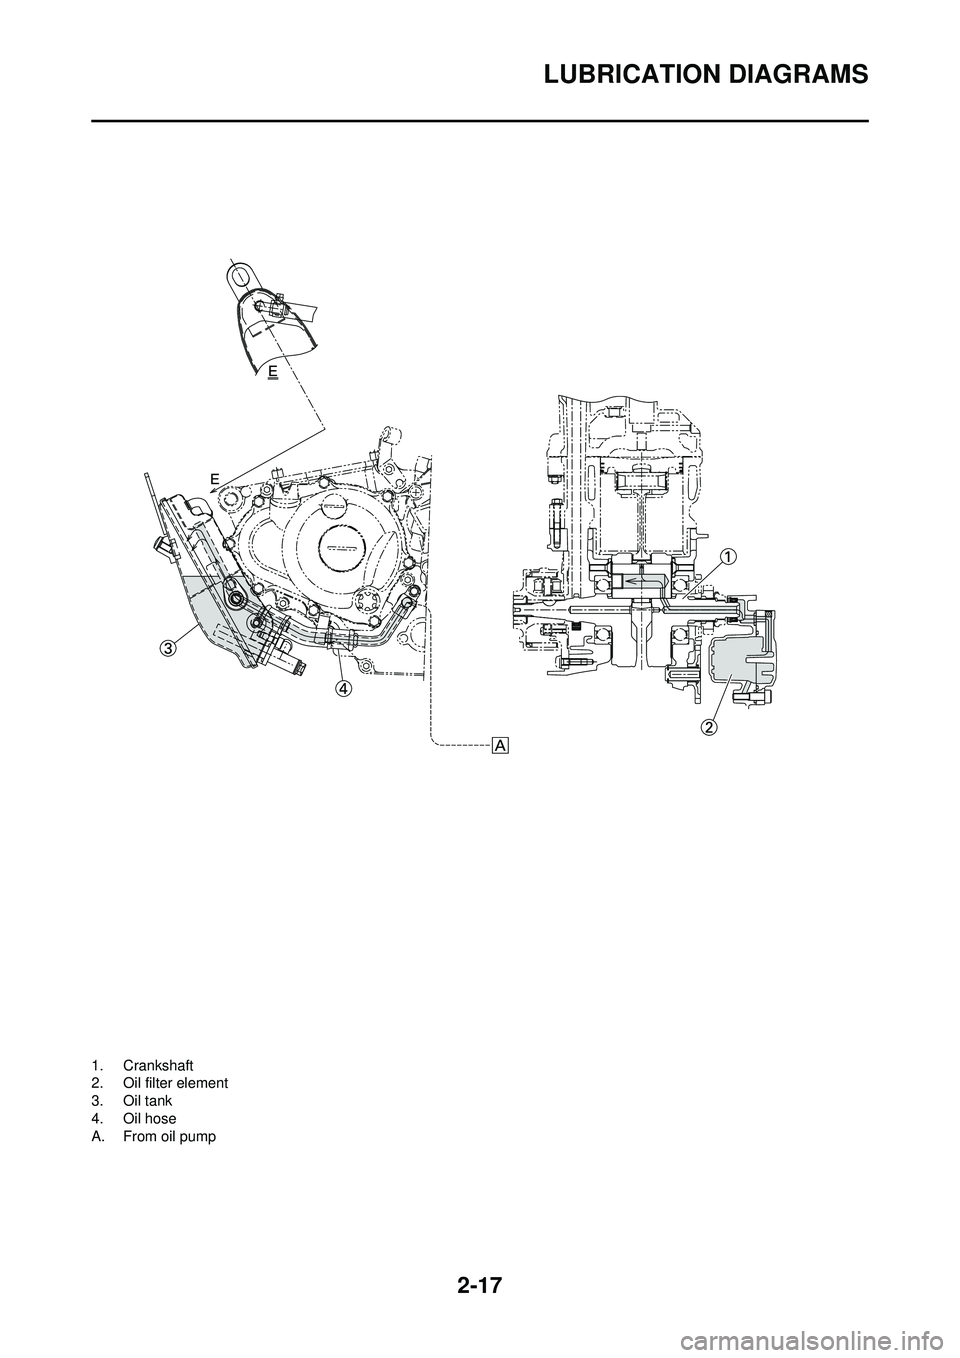 YAMAHA YZ250F 2010  Owners Manual 2-17
LUBRICATION DIAGRAMS
1. Crankshaft
2. Oil filter element
3. Oil tank
4. Oil hose
A. From oil pump 